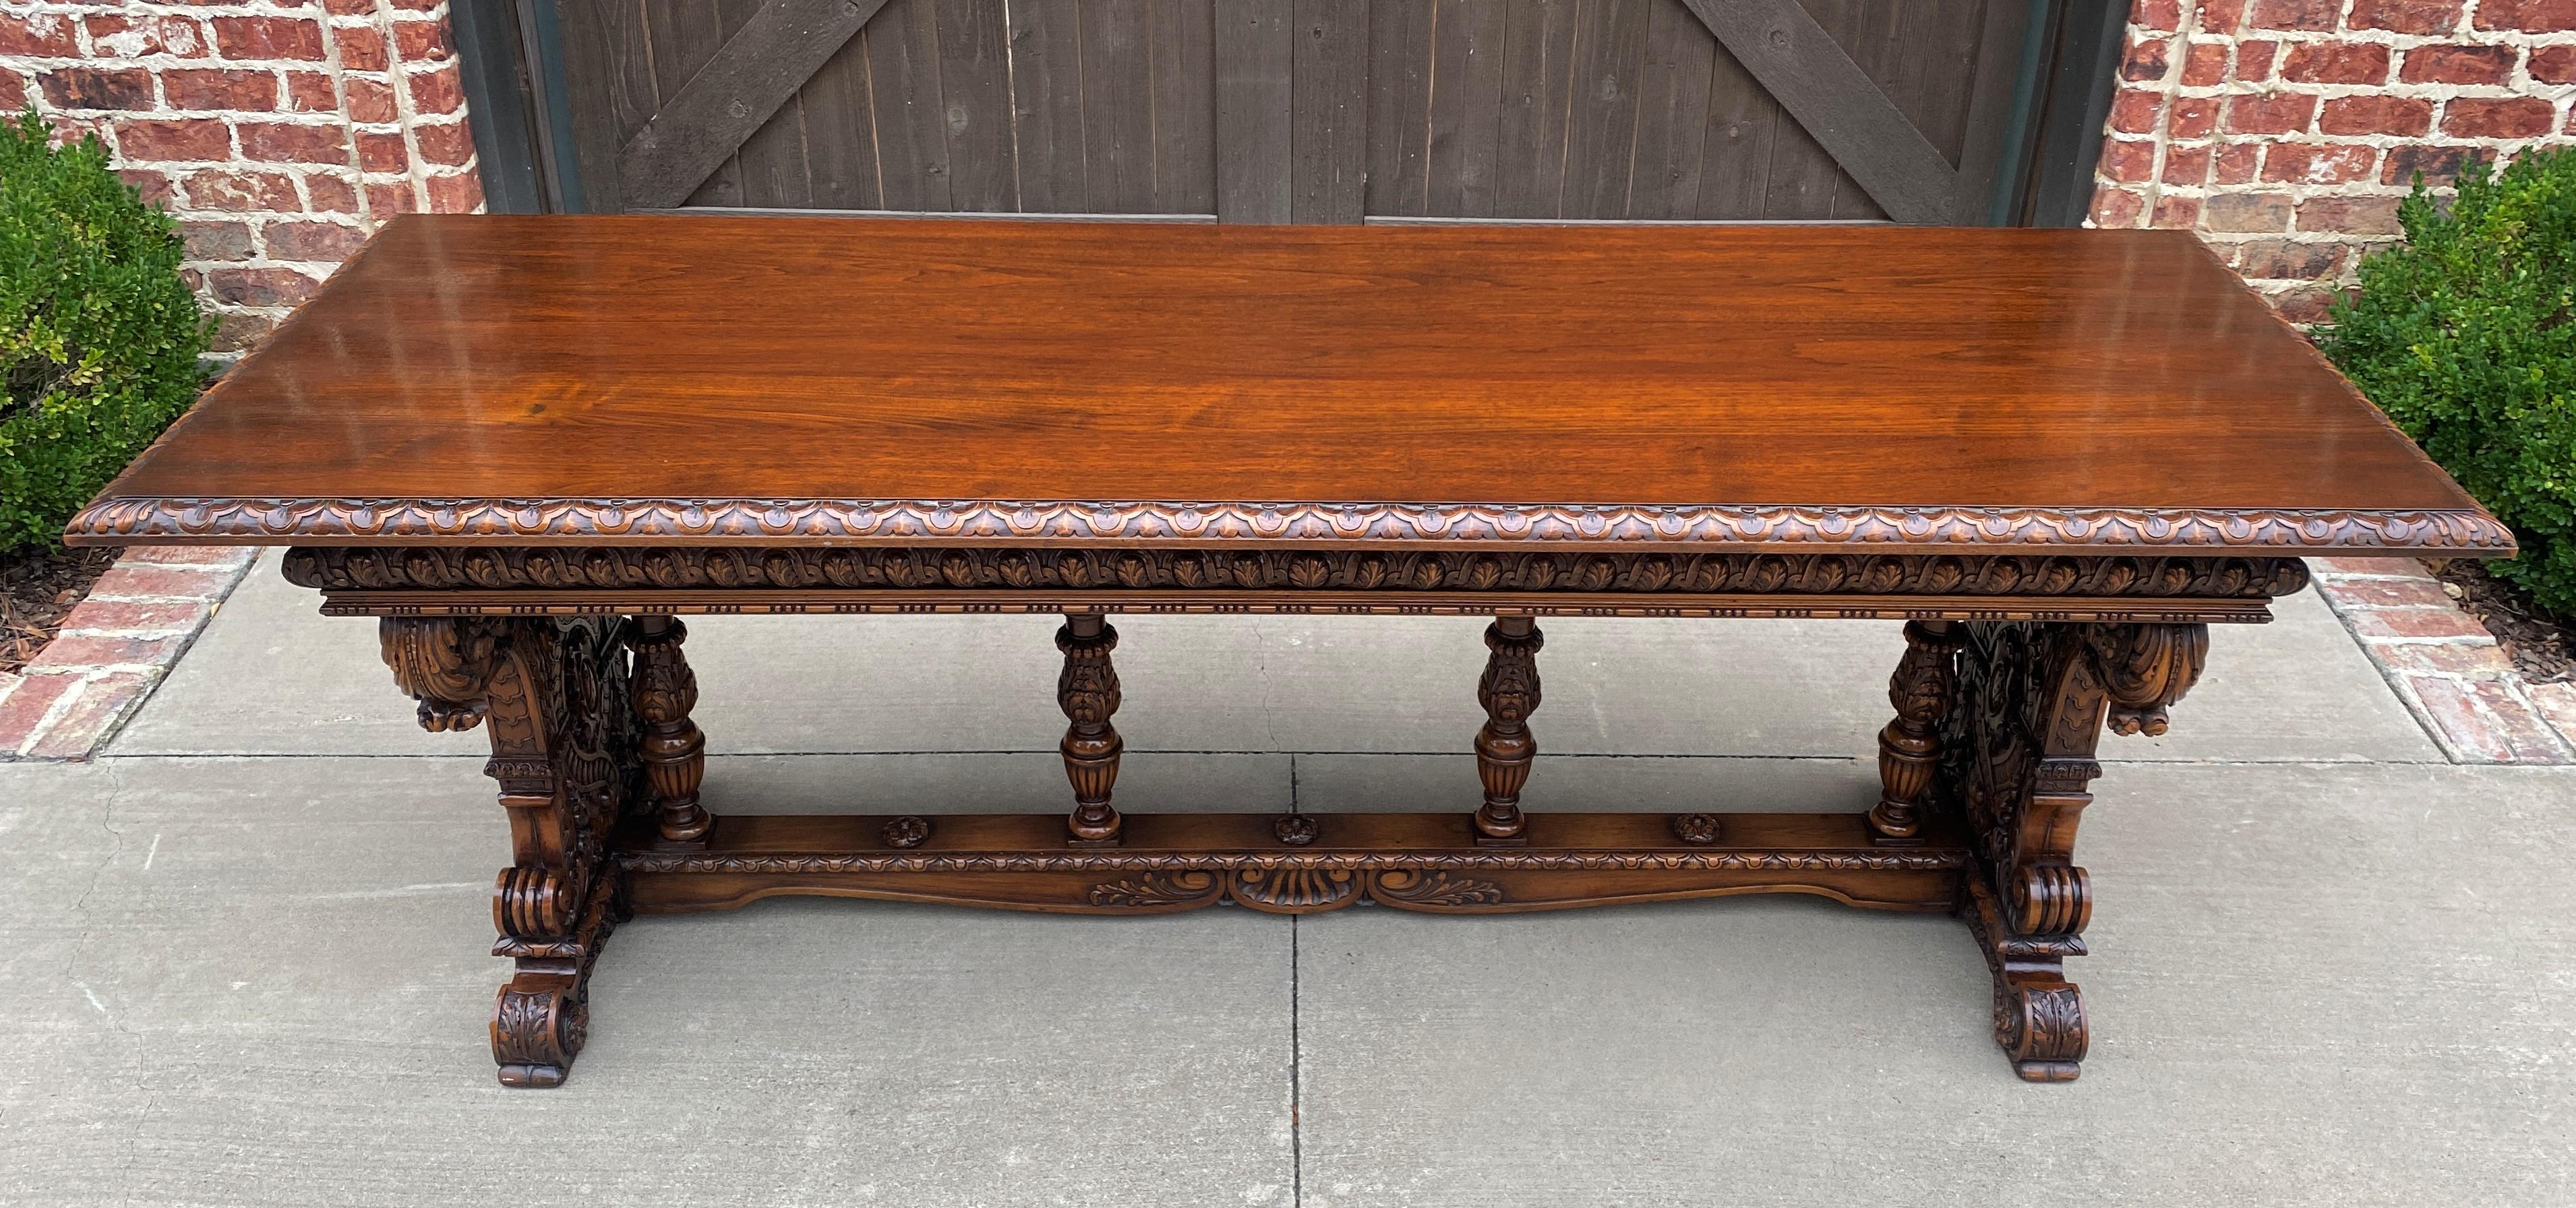 Stunning antique French walnut Renaissance Revival dining table conference library table or desk~~highly carved~~c. 1900s-1920s

Use as a dining table or an office/library conference table or desk~~perfect for holiday gatherings

Exquisitely